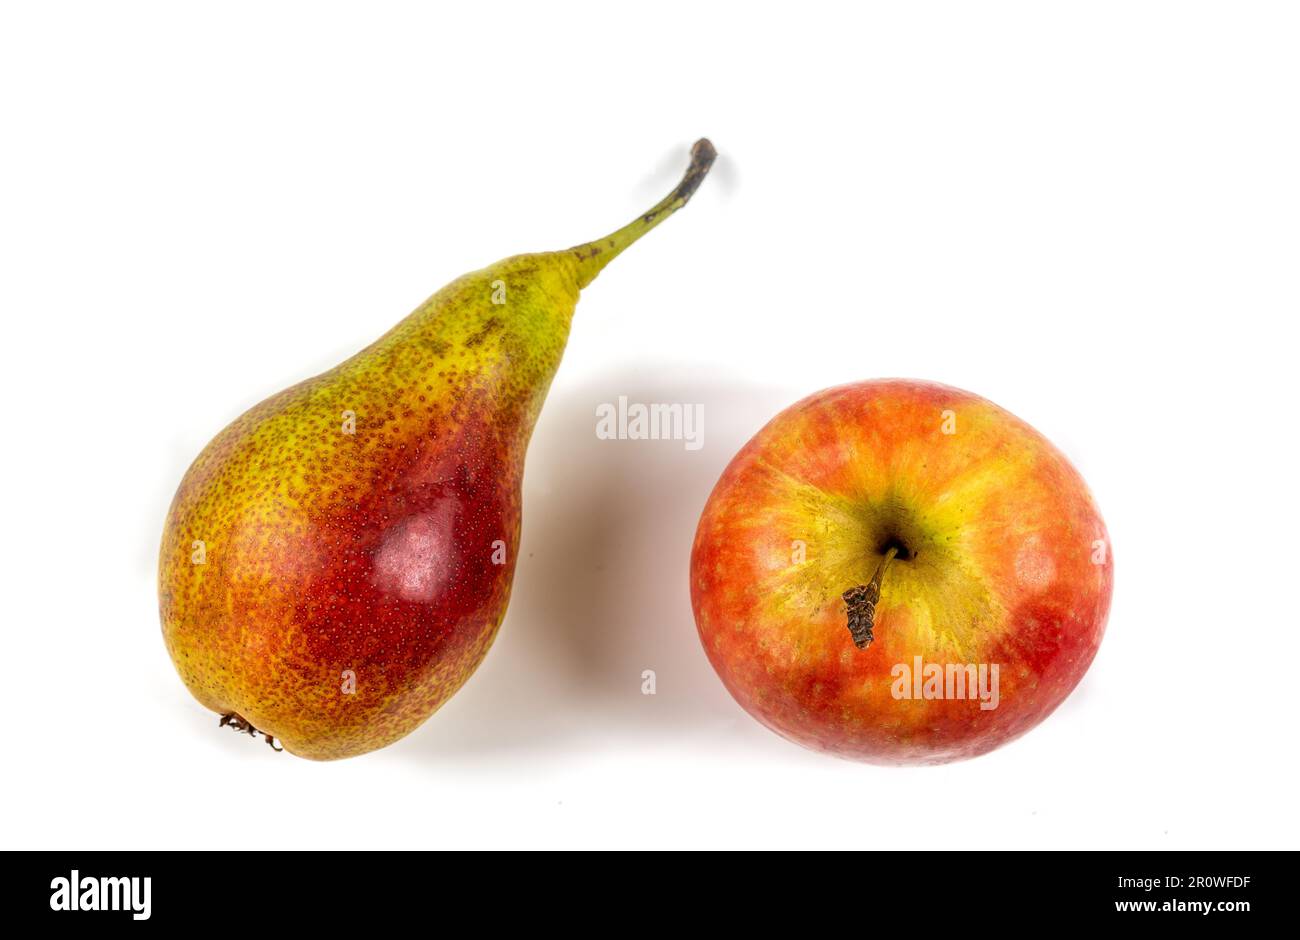 Apple and pear side by side on a white background Stock Photo